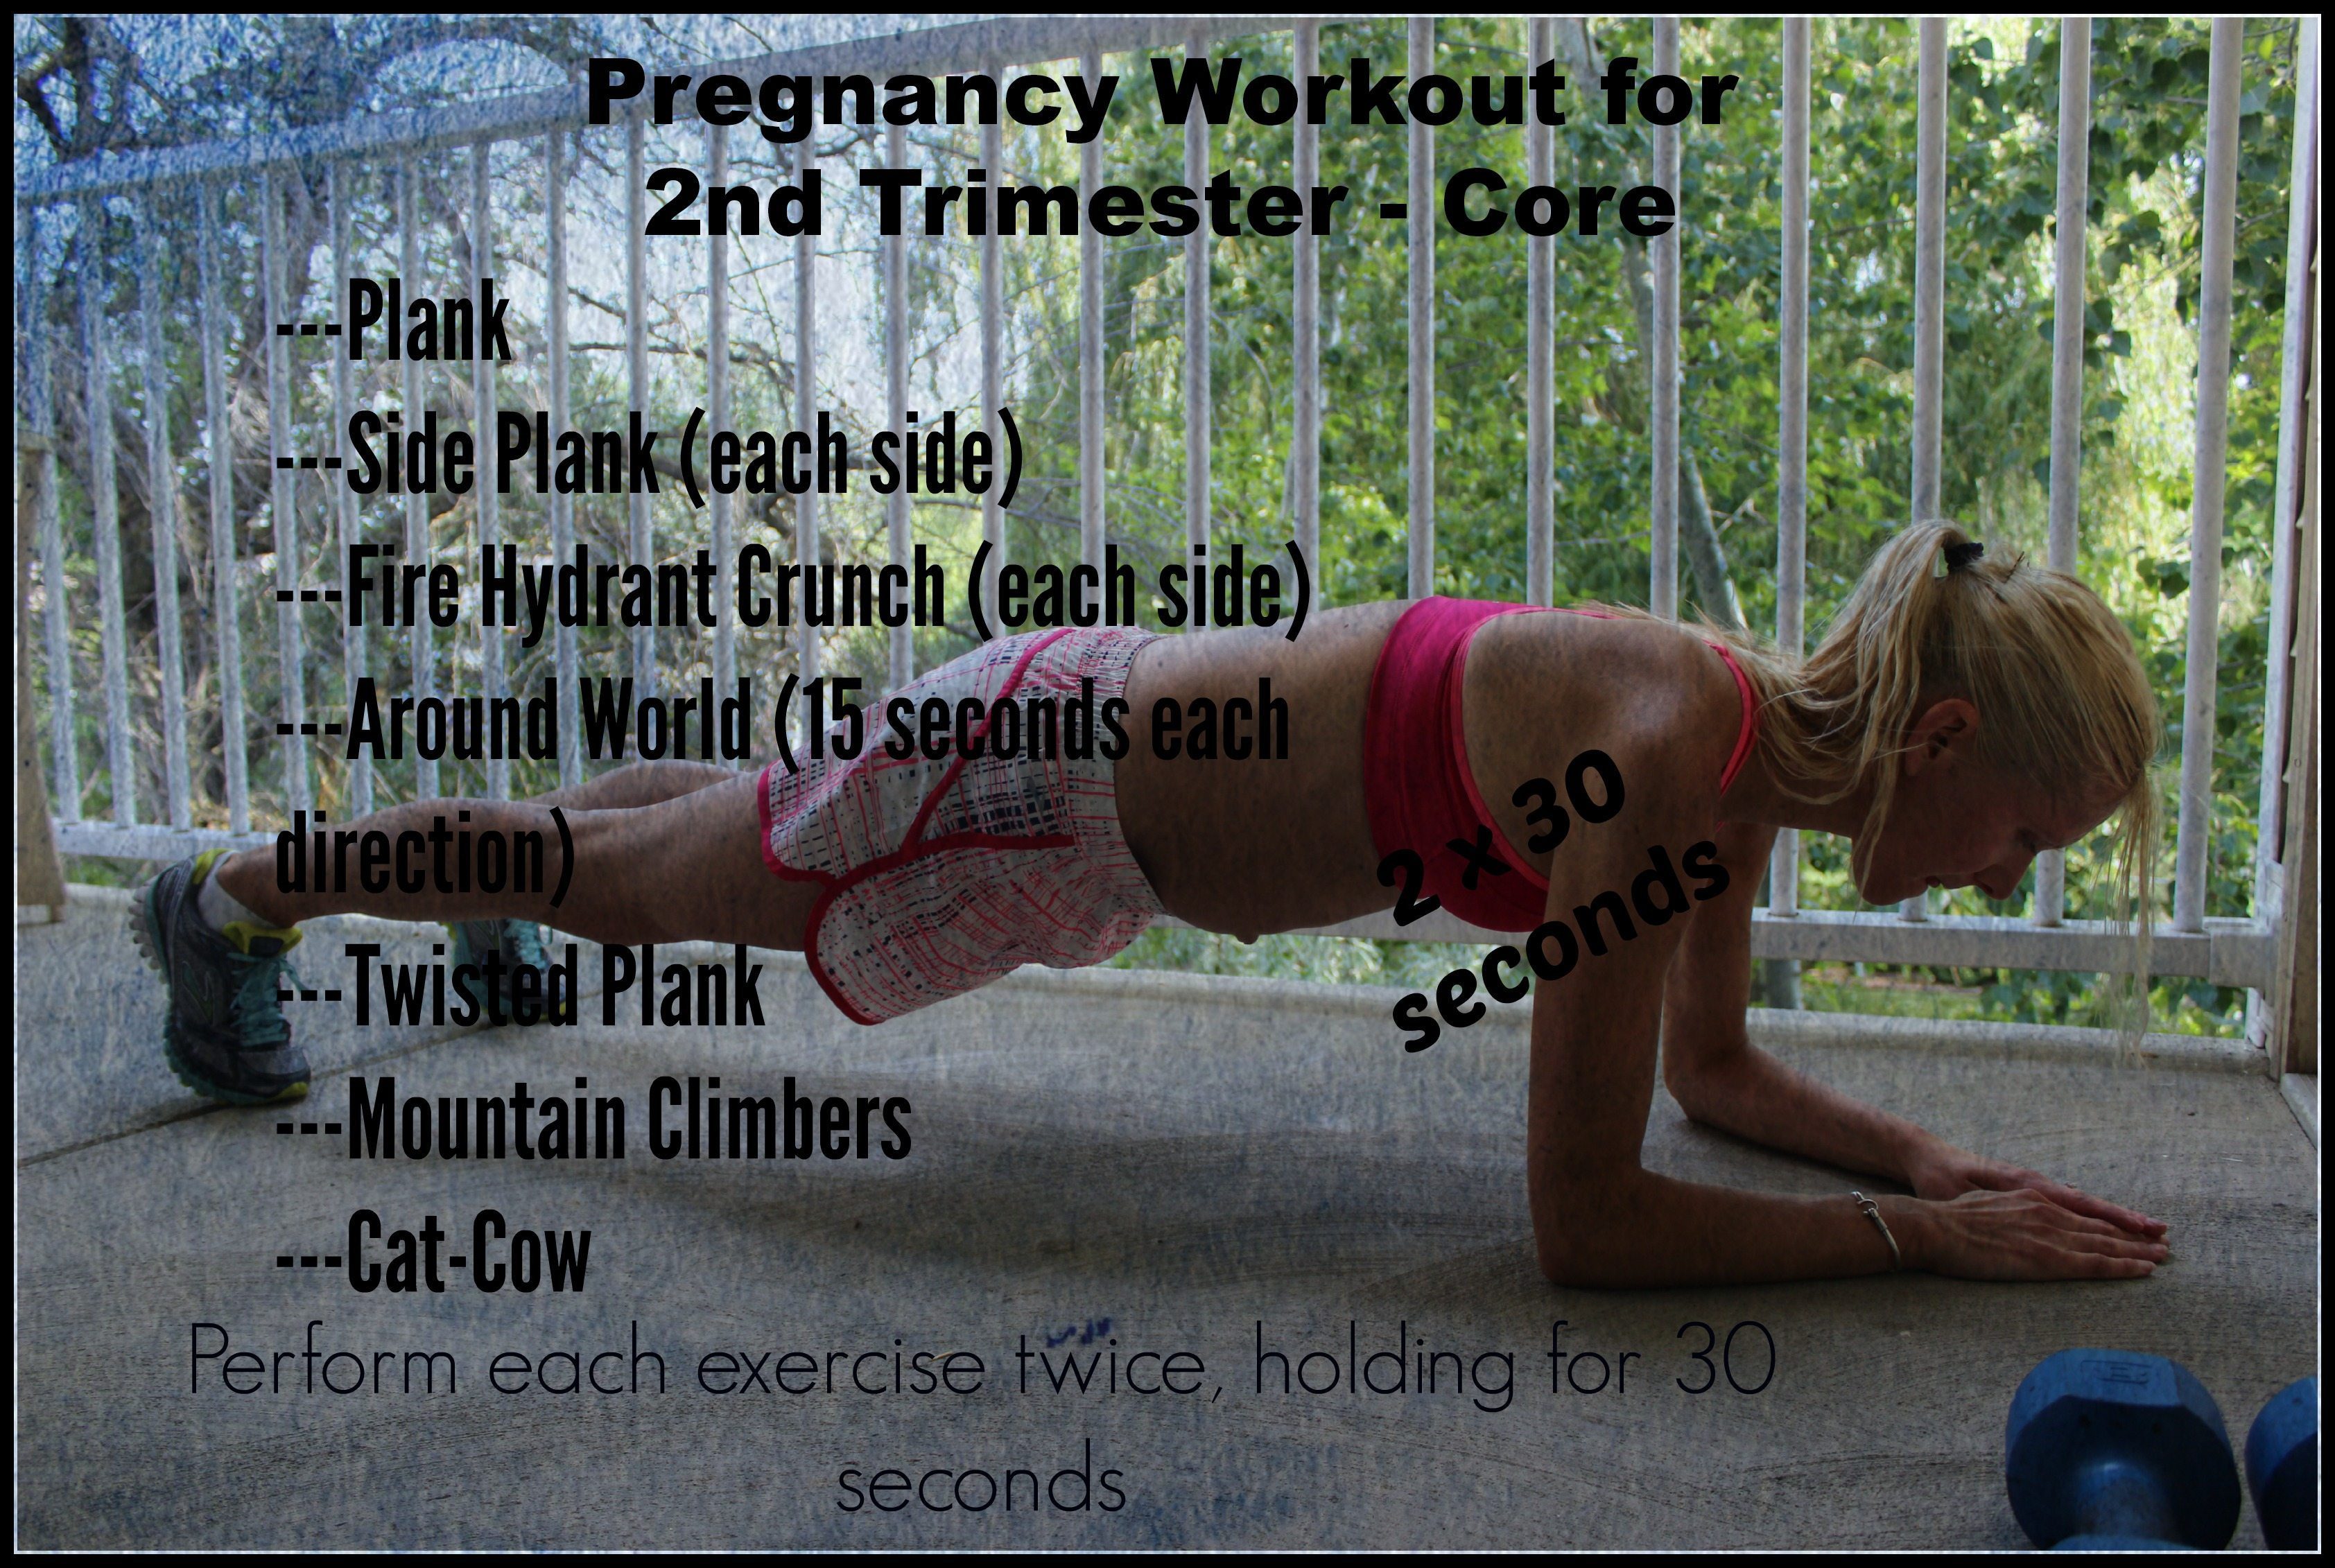 Pregnancy Workout for 2nd Trimester - Core